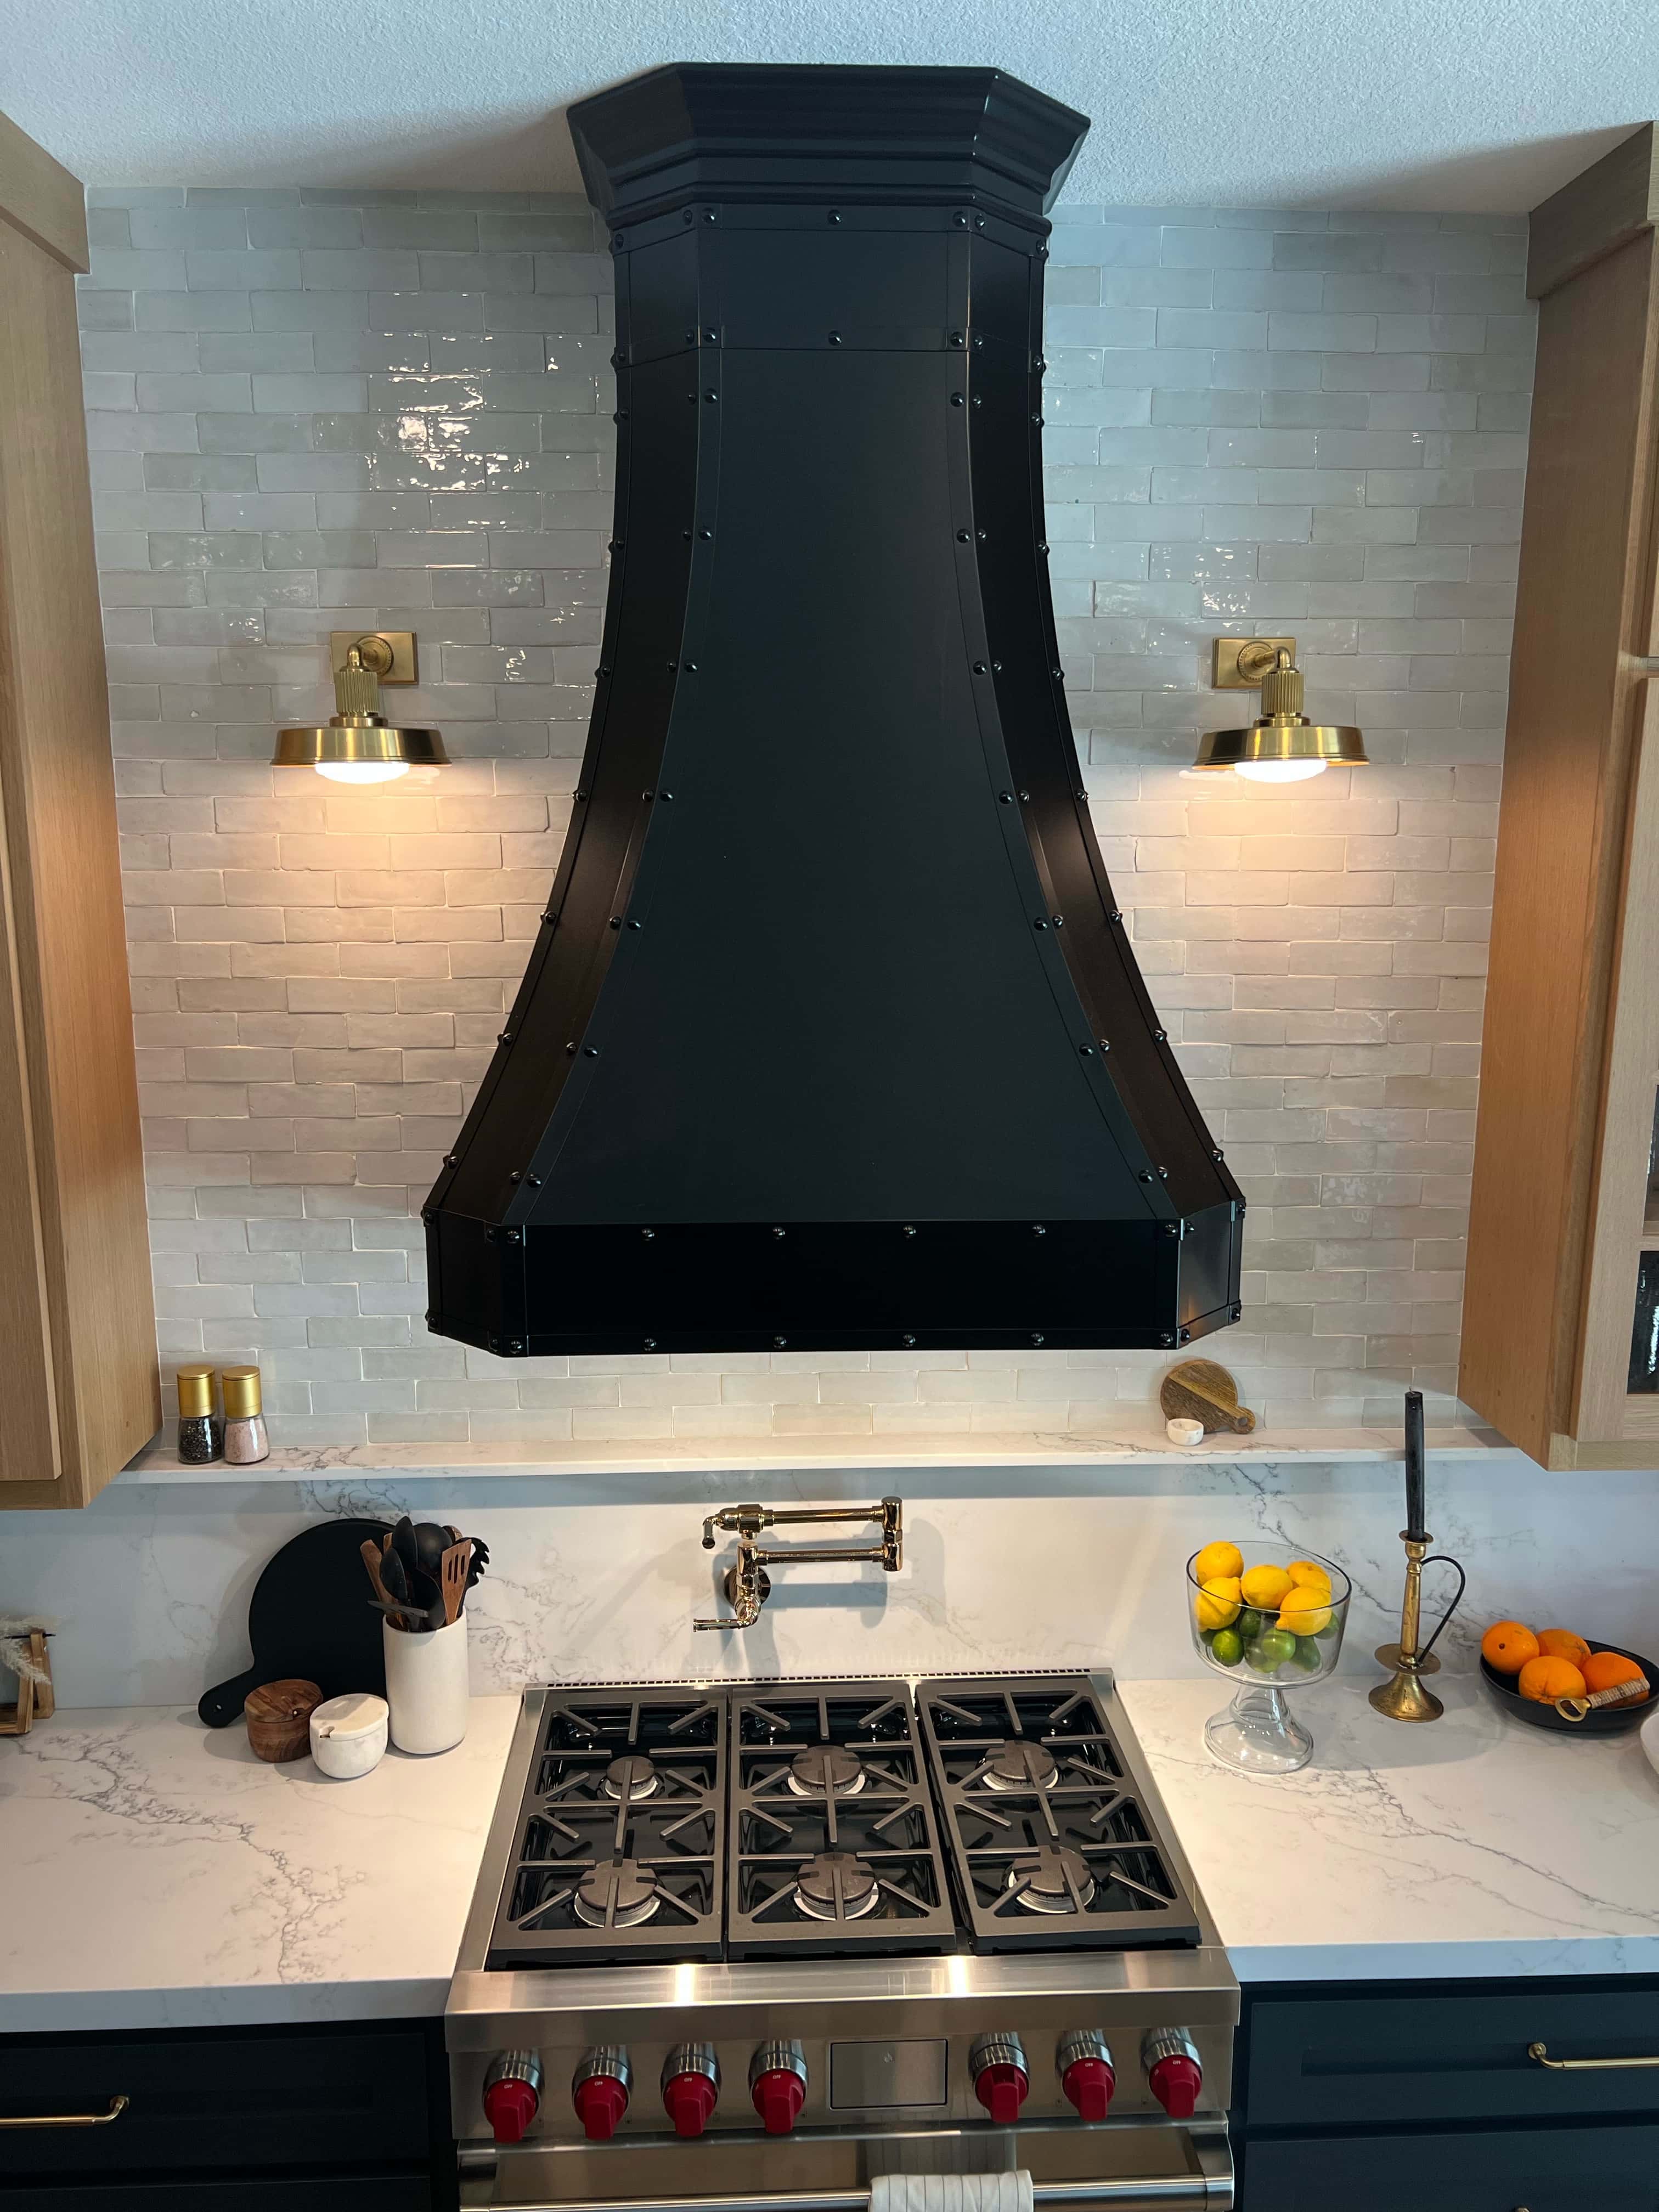 Marveles range hood marvels meet a tuscan-inspired gallery, black kitchen cabinets, andluxurious marble kitchen countertops